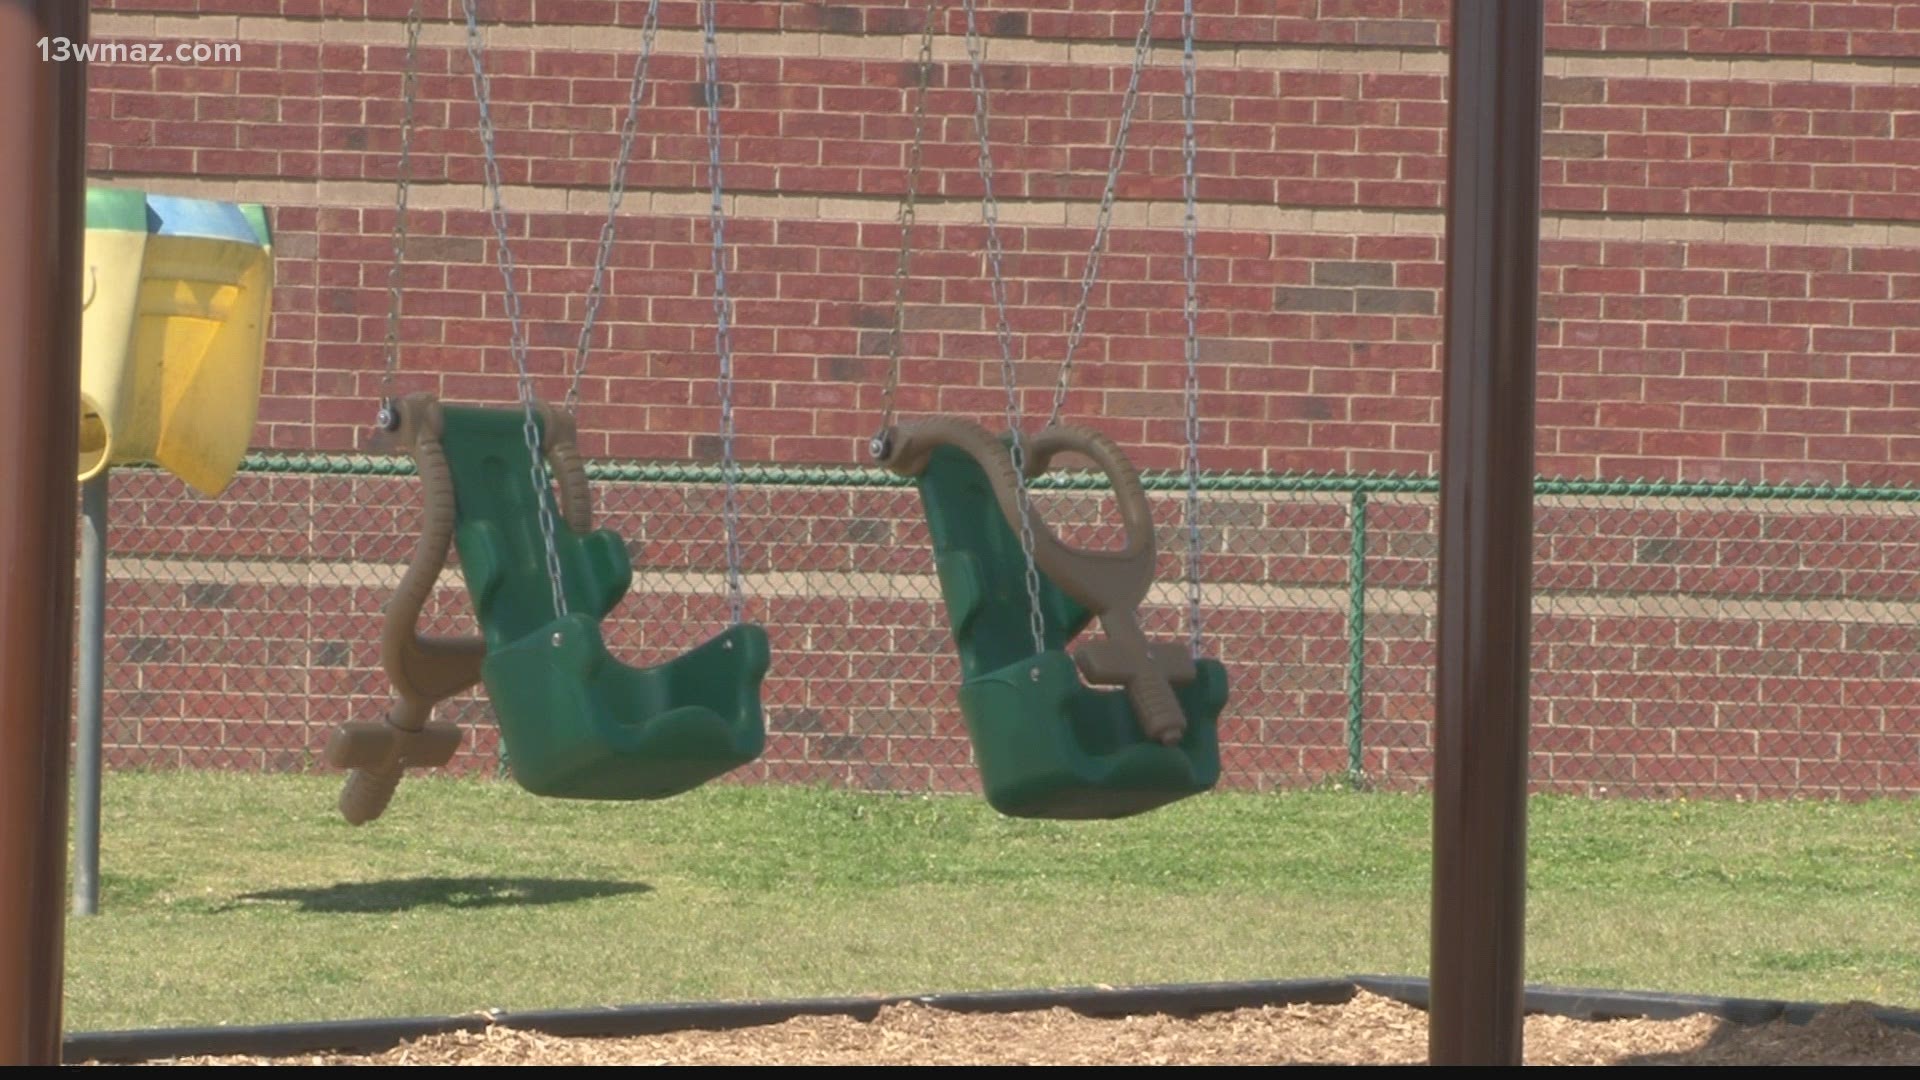 About three-fourths of the splash pad funding was secured through Head Start, a federally-funded program.